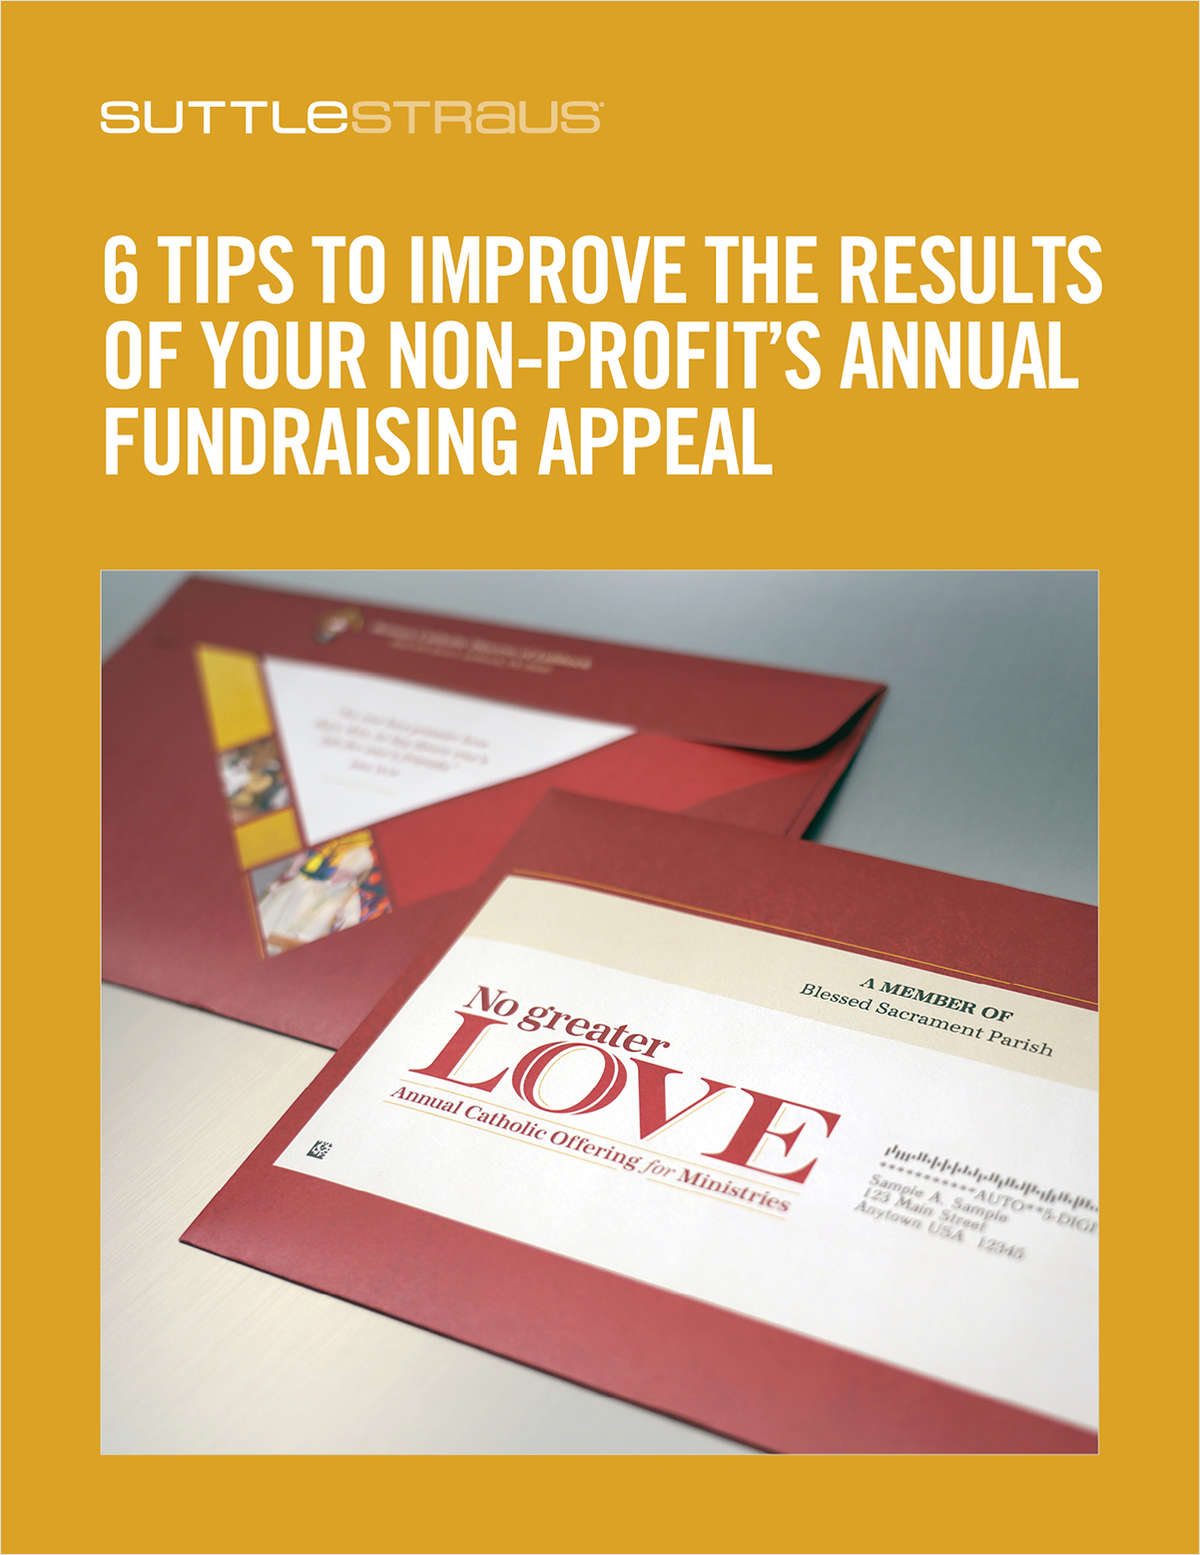 6 Tips to Improve the Results of Your Non-Profit's Annual Fundraising Appeal